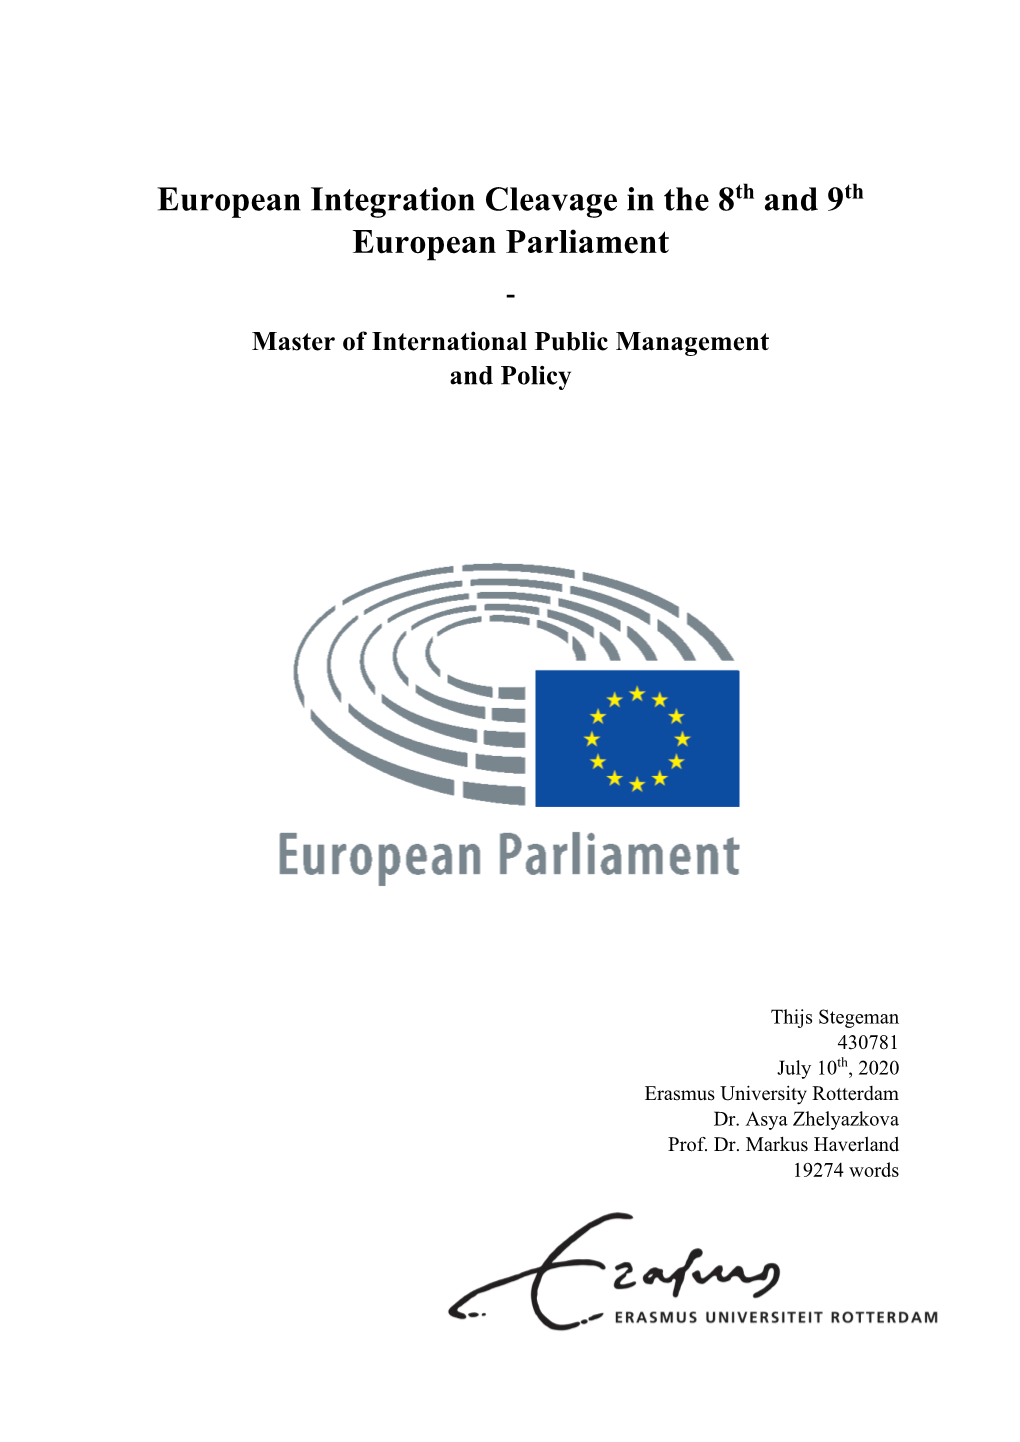 European Integration Cleavage in the 8Th and 9Th European Parliament - Master of International Public Management and Policy